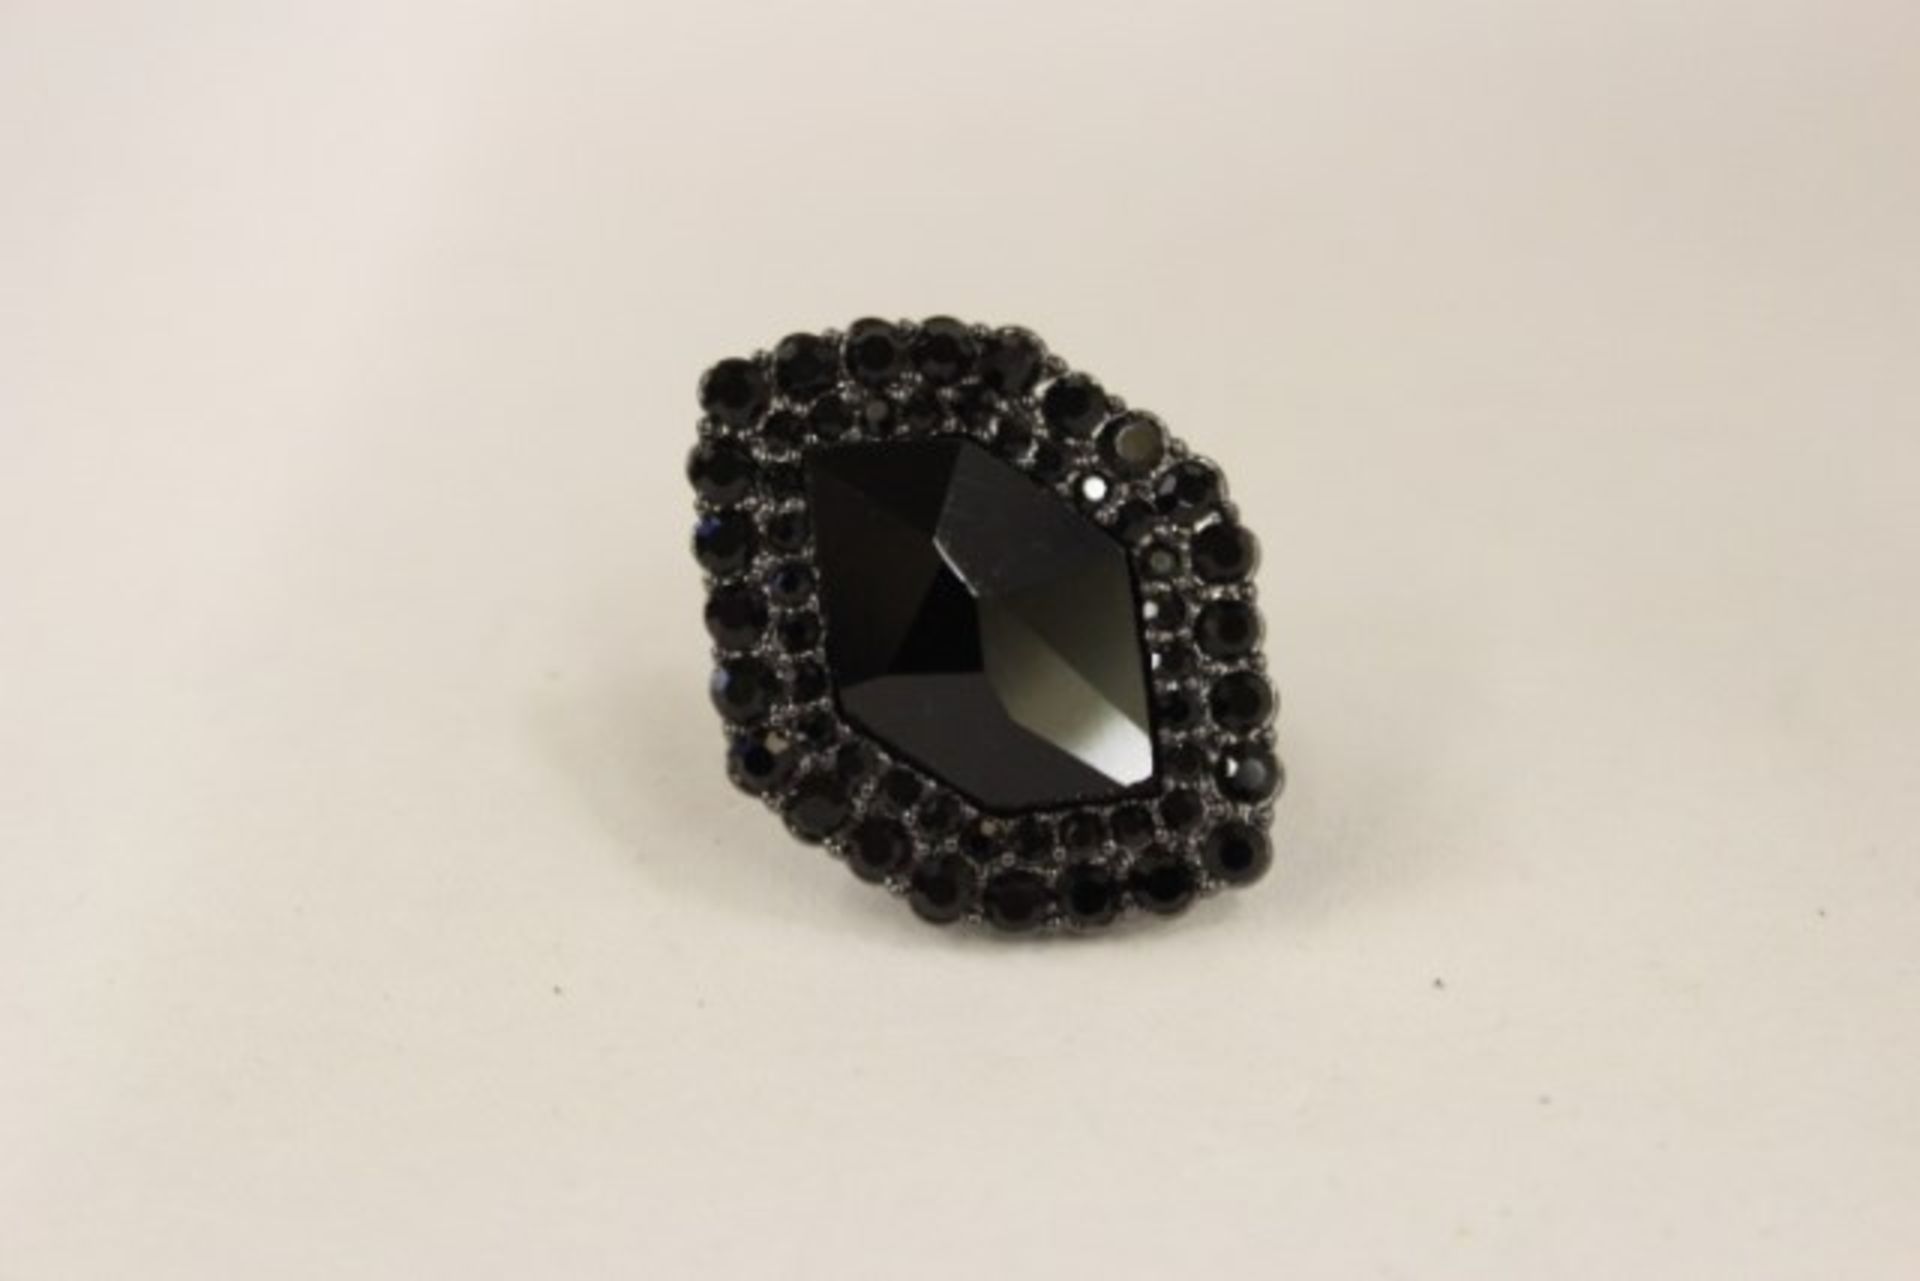 V WM Black Crystal Ring X 2 YOUR BID PRICE TO BE MULTIPLIED BY TWO